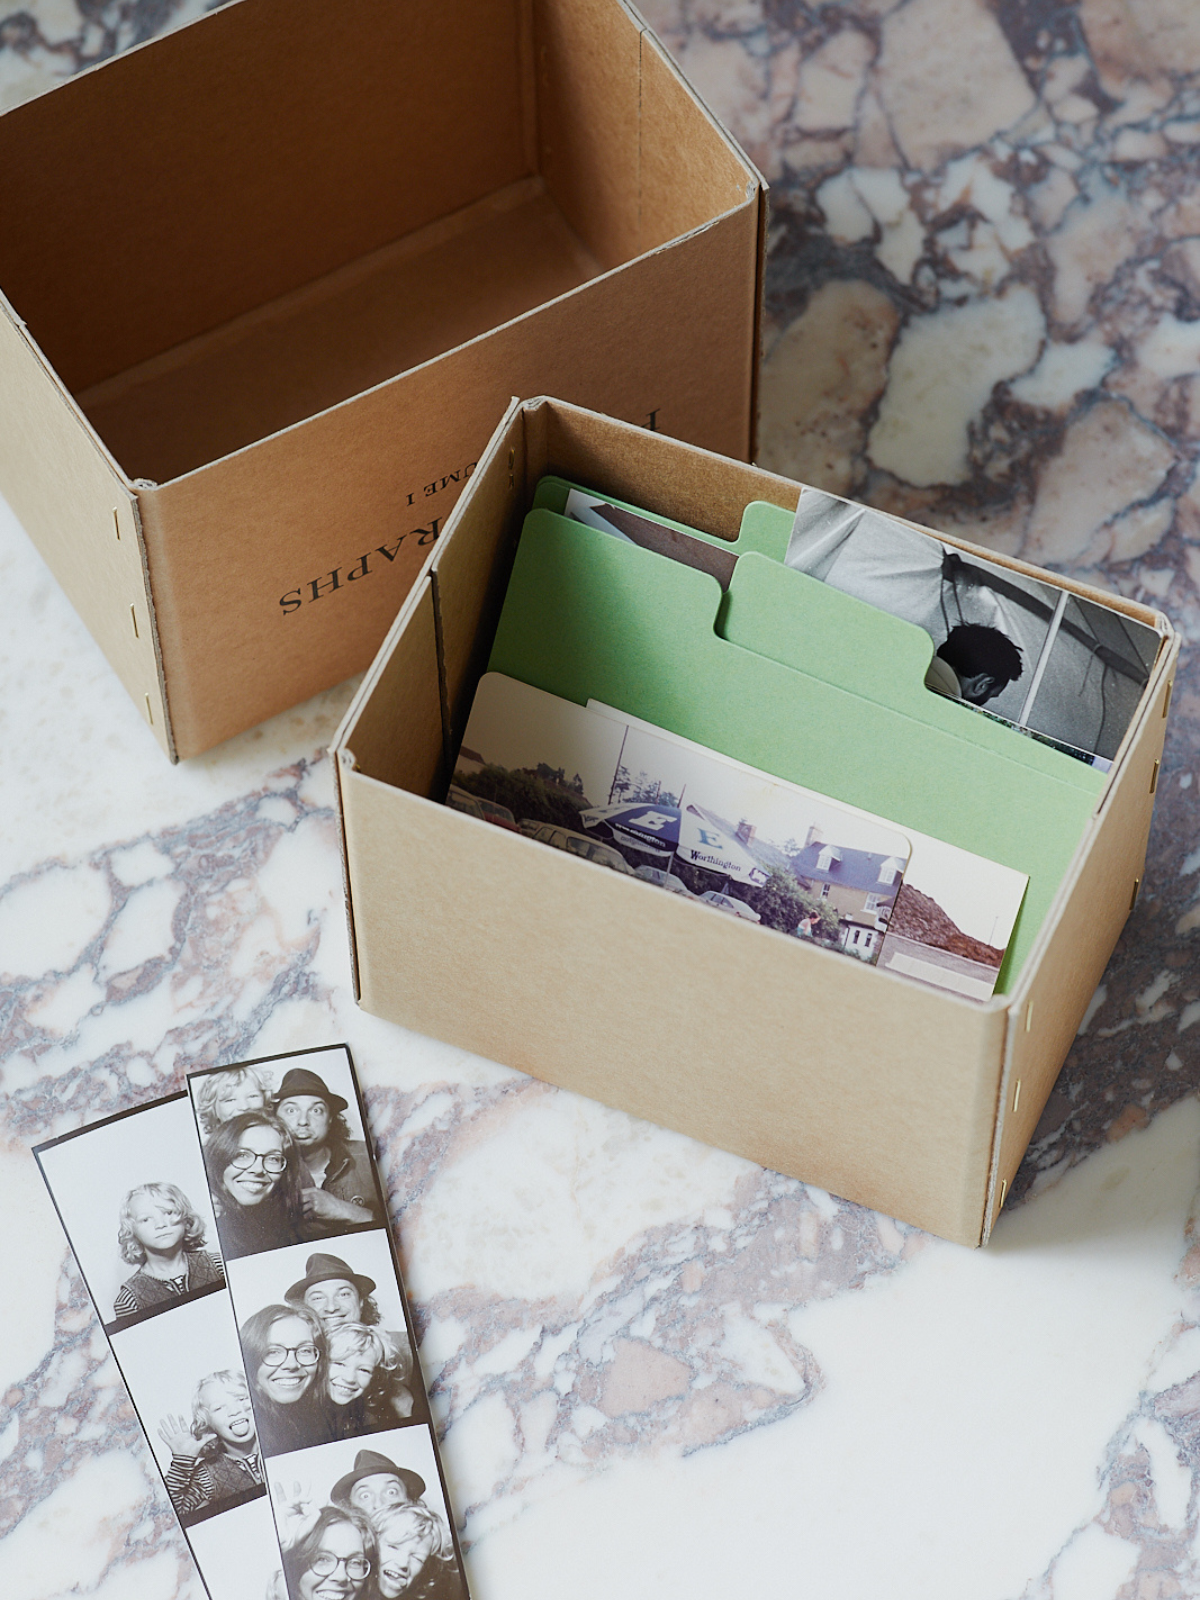 a Mabel & co letterpress archive box with photobooth photographs inside